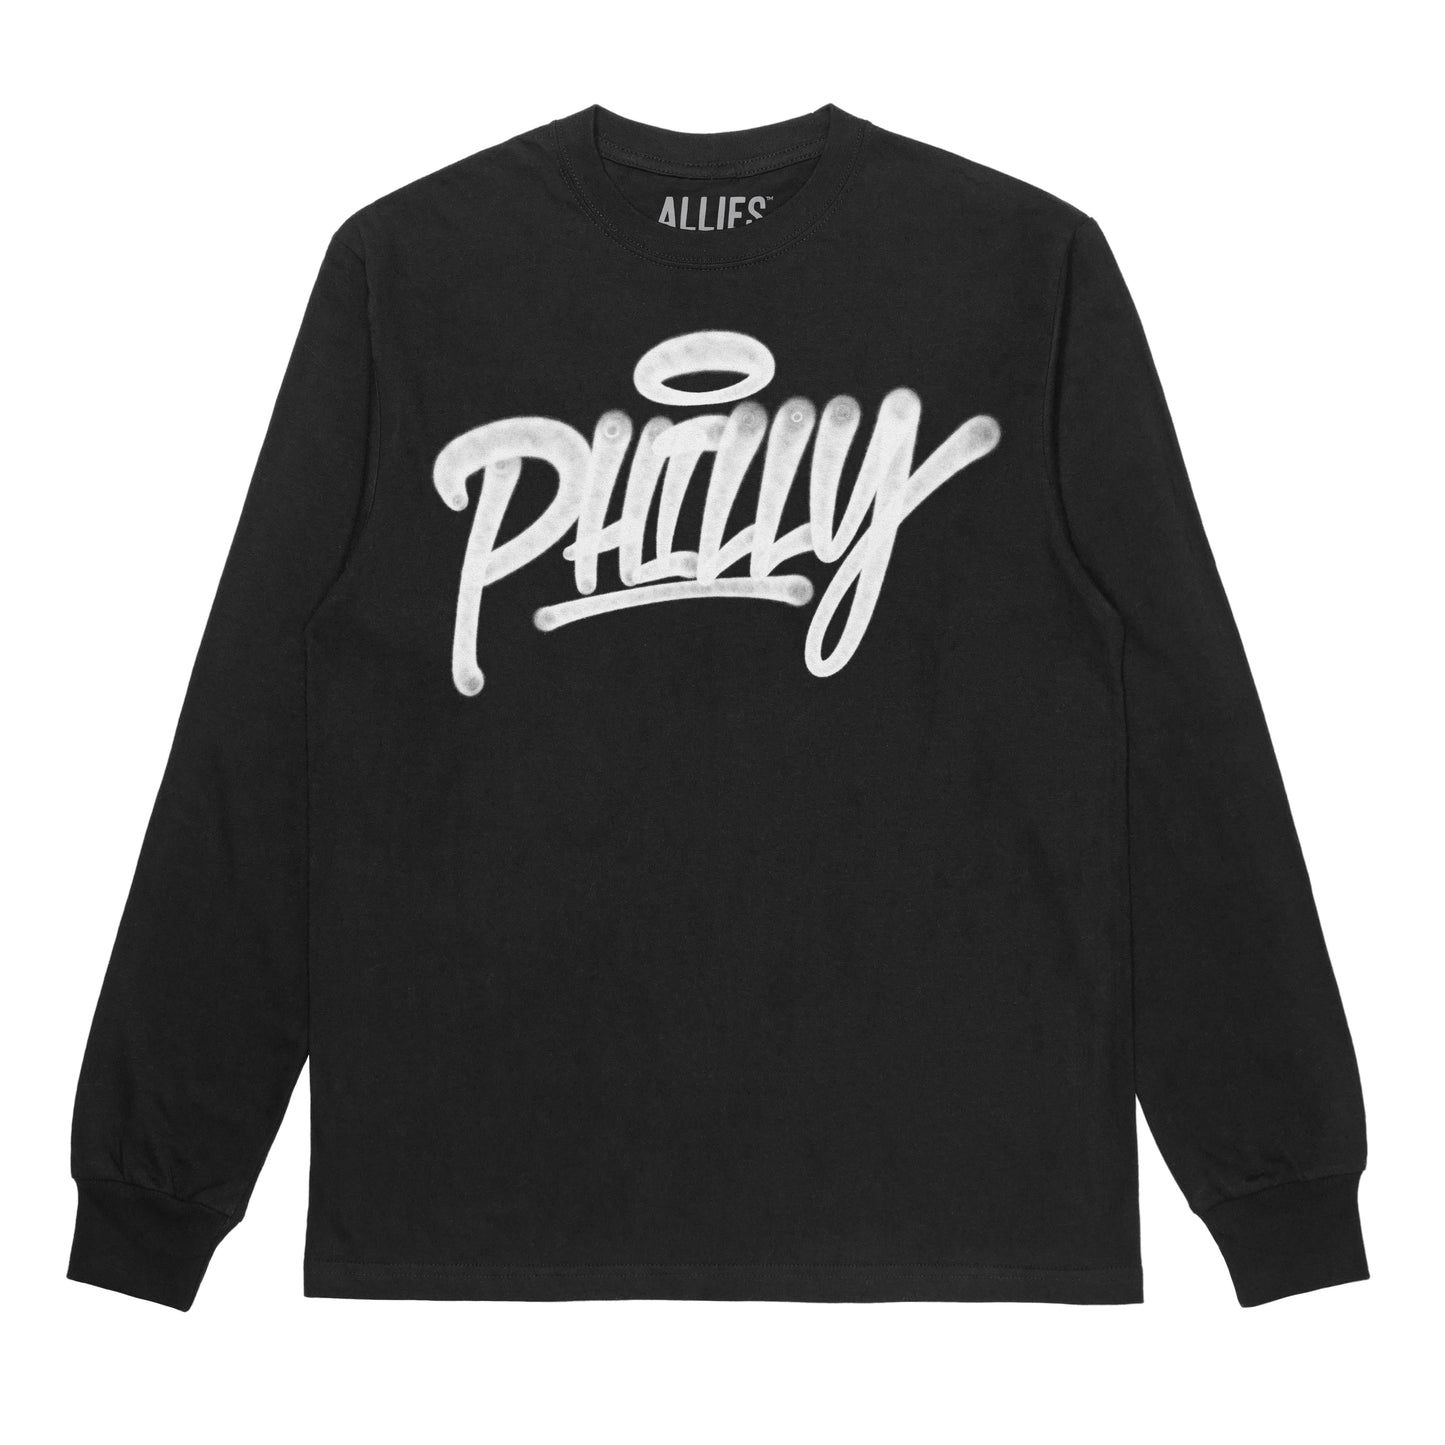 Philly Handstyle T-shirt